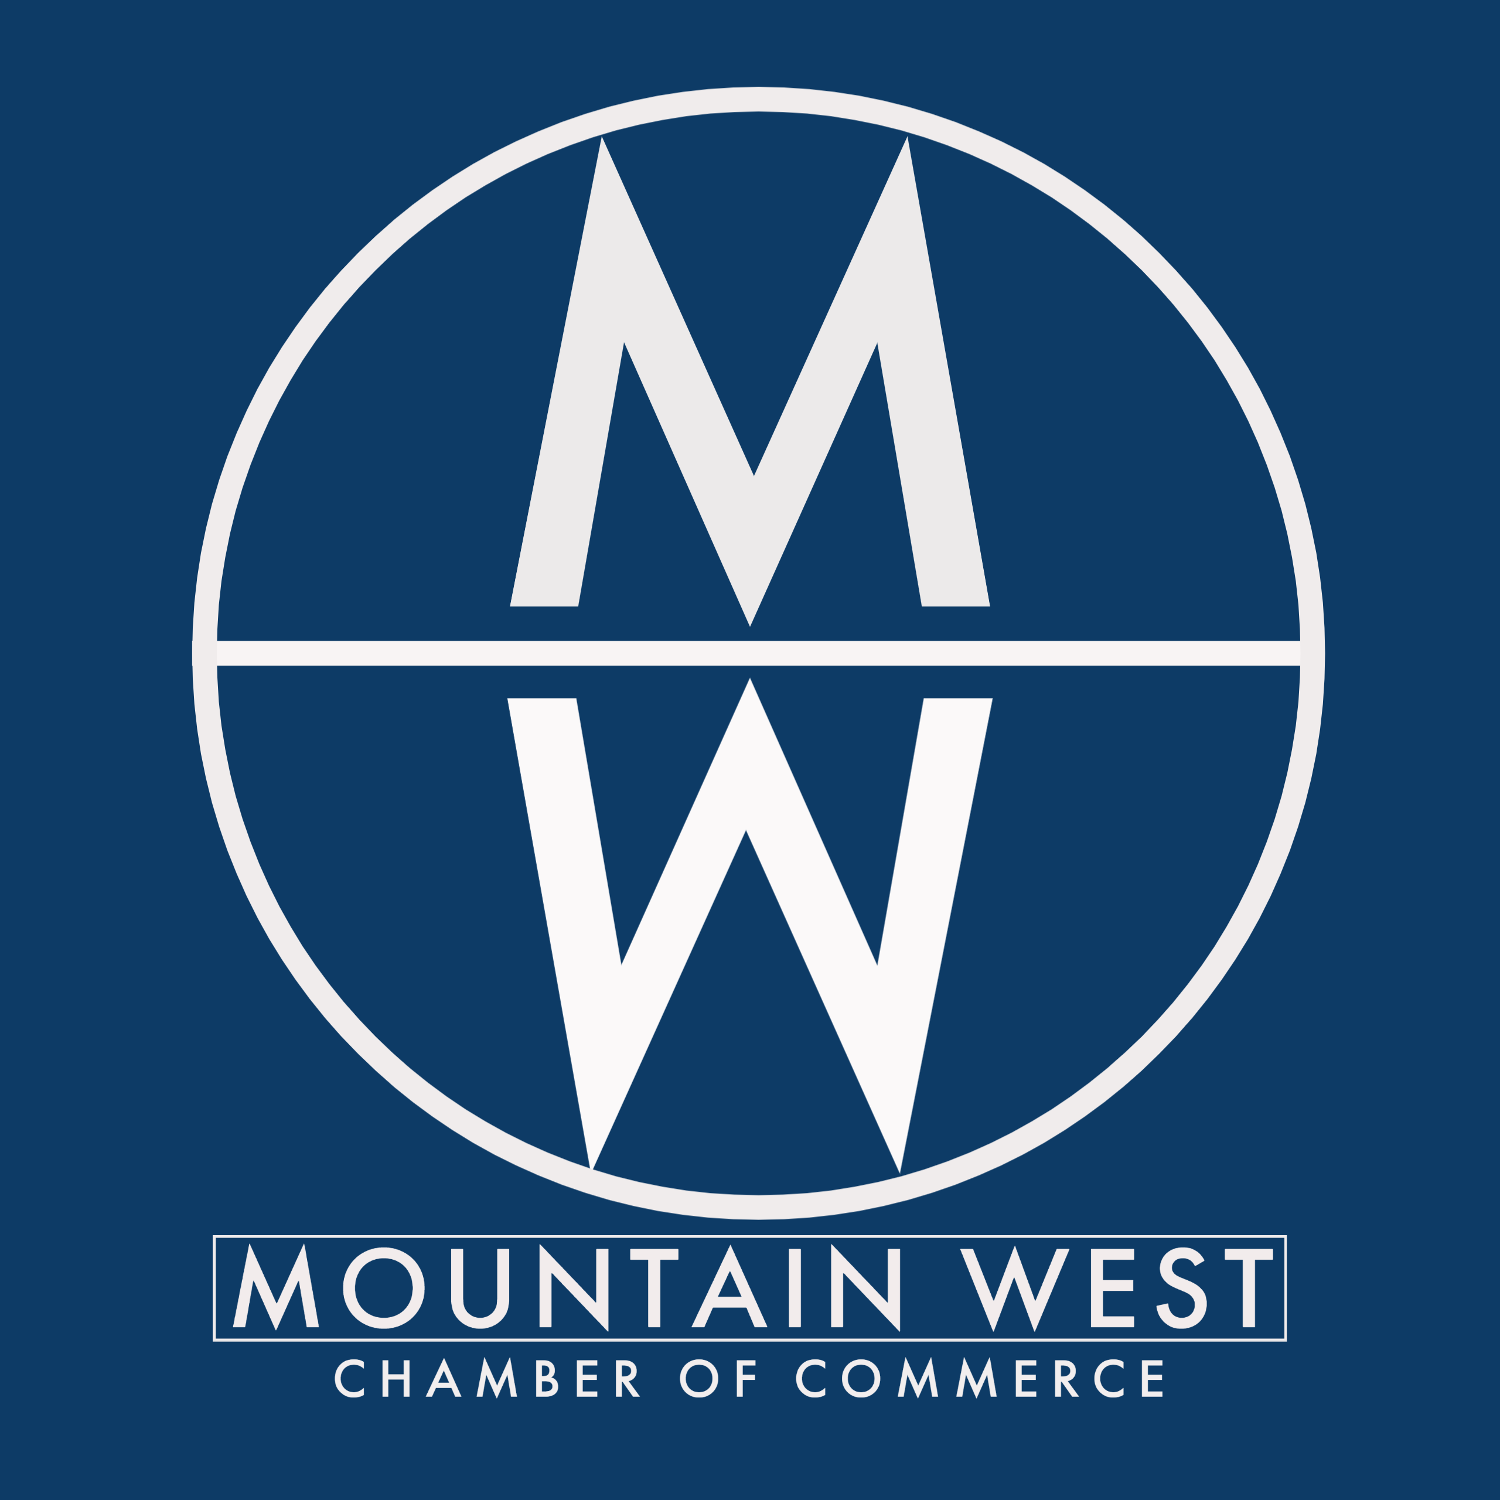 Mountain West Chamber of Commerce